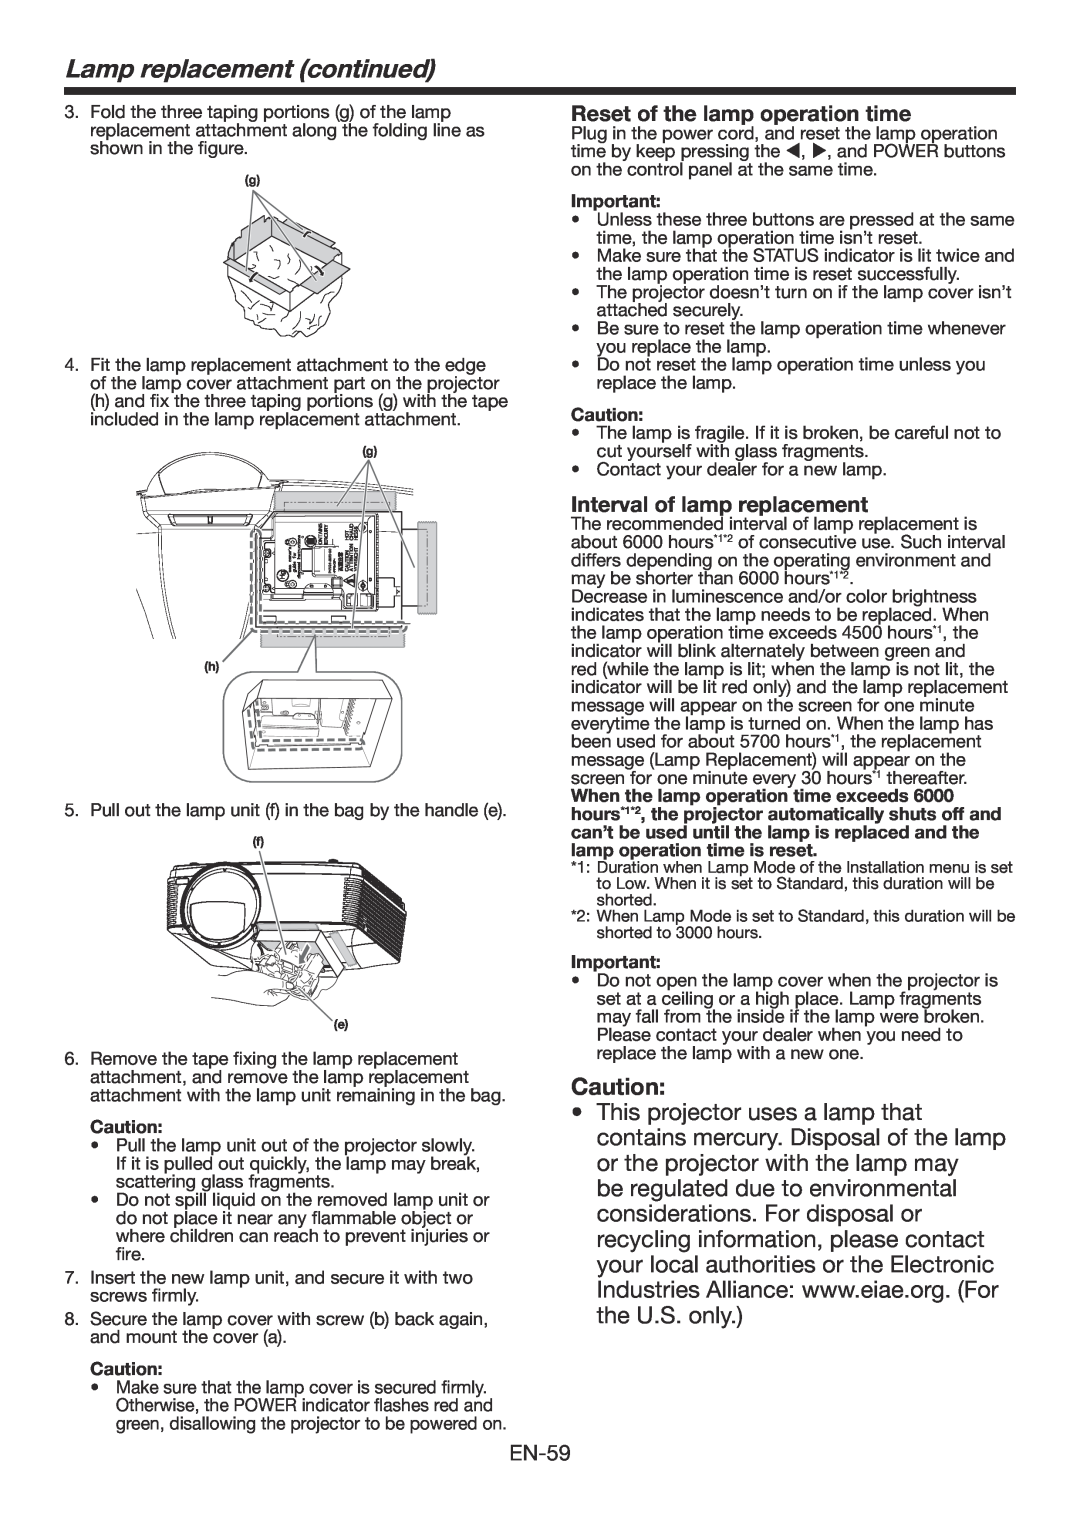 Mitsubishi Electronics WD390U-EST user manual Lamp replacement continued, Reset of the lamp operation time 